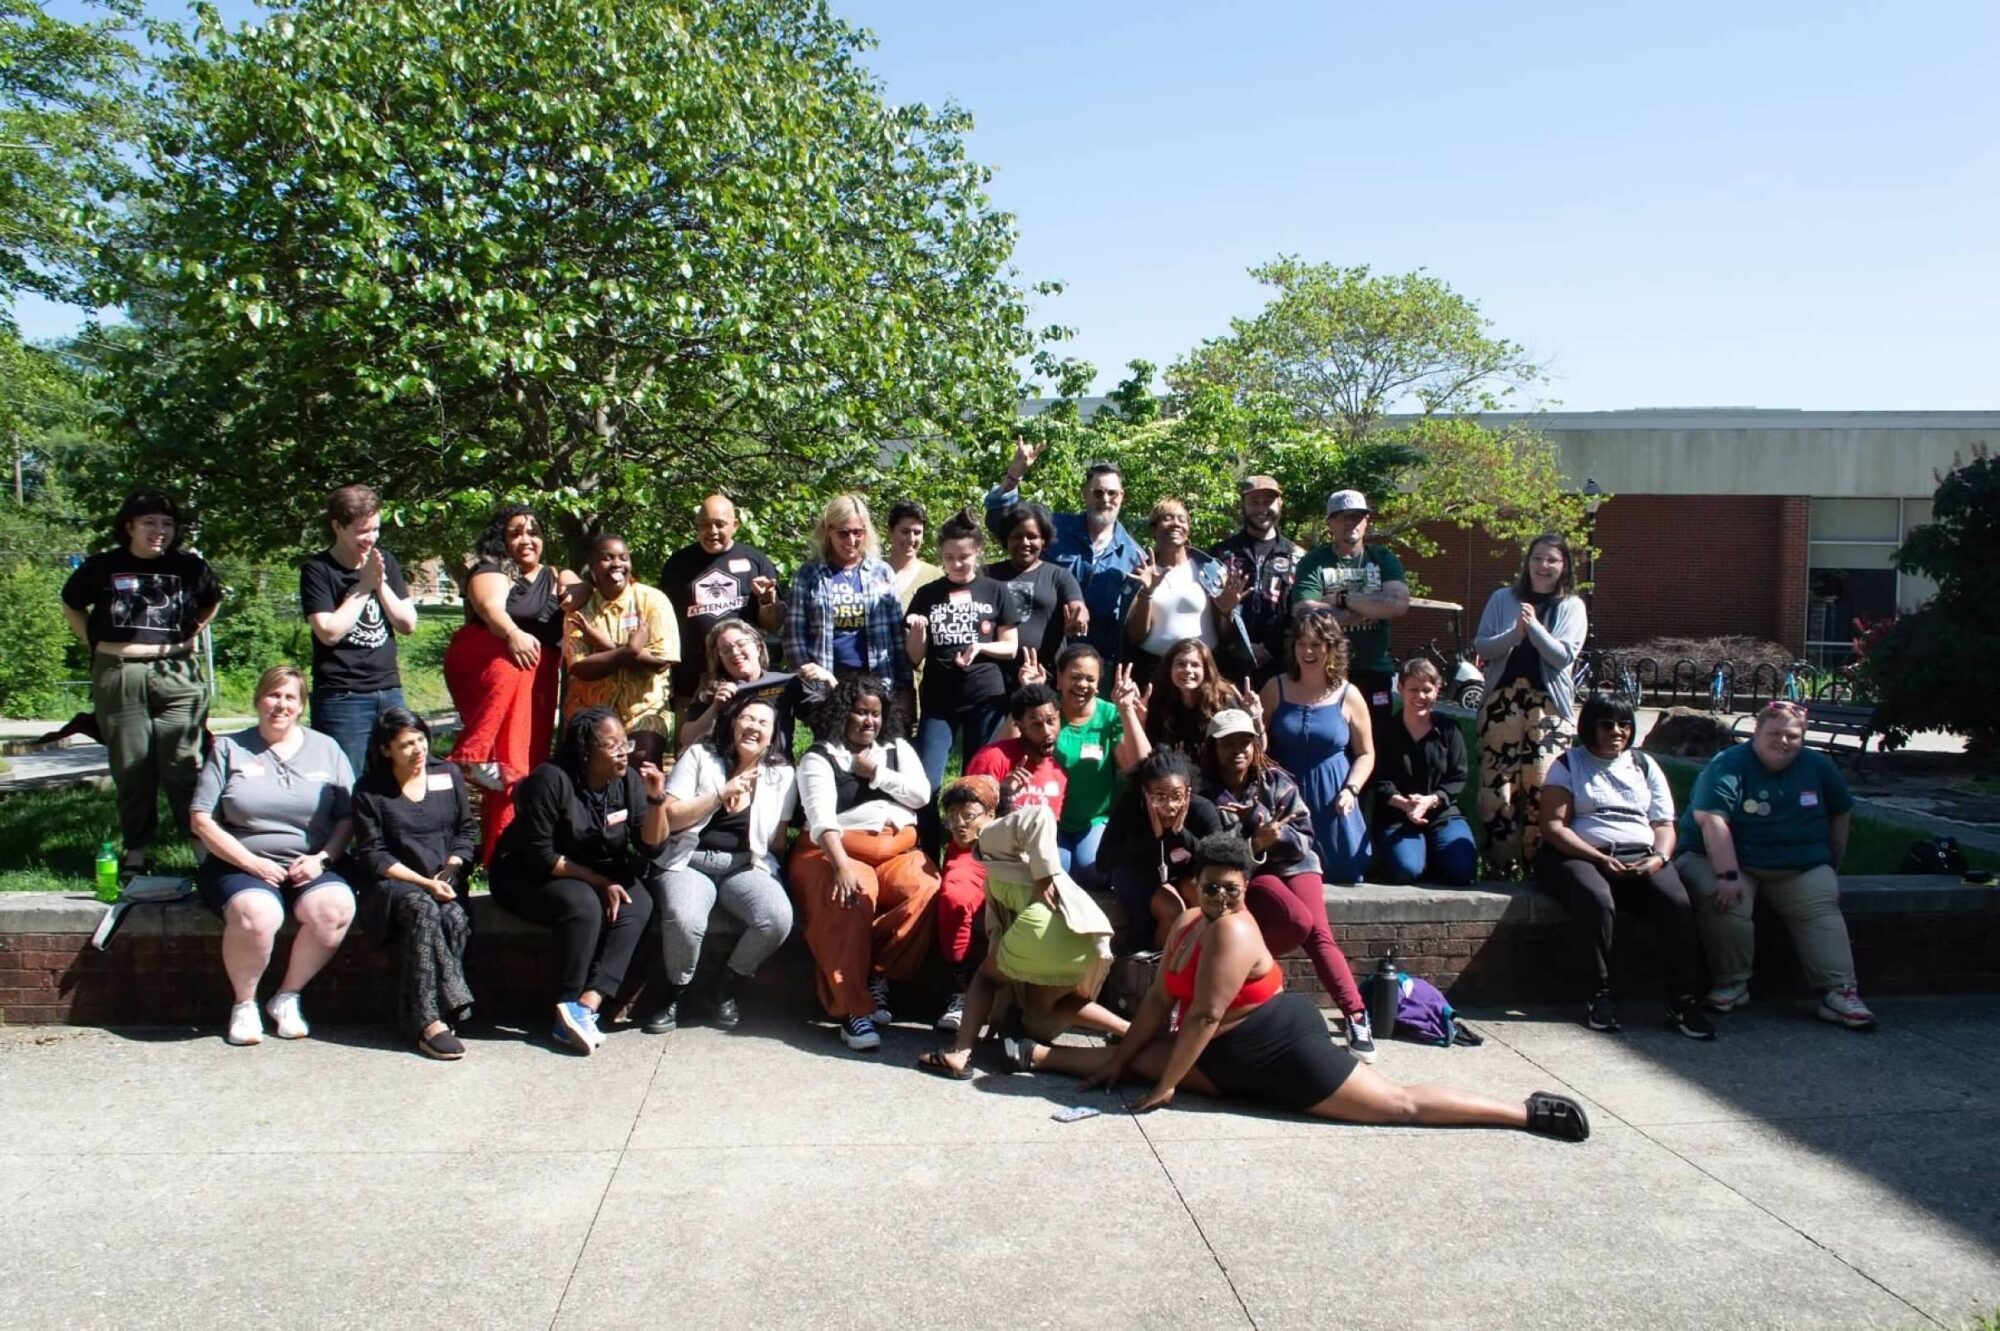 Members of the Kentucky Civic Engagement Table pose together for a group photo in front of trees outside. People are seen smiling and laughing. One member towards the bottom of the photo is doing a split pose on the ground. 